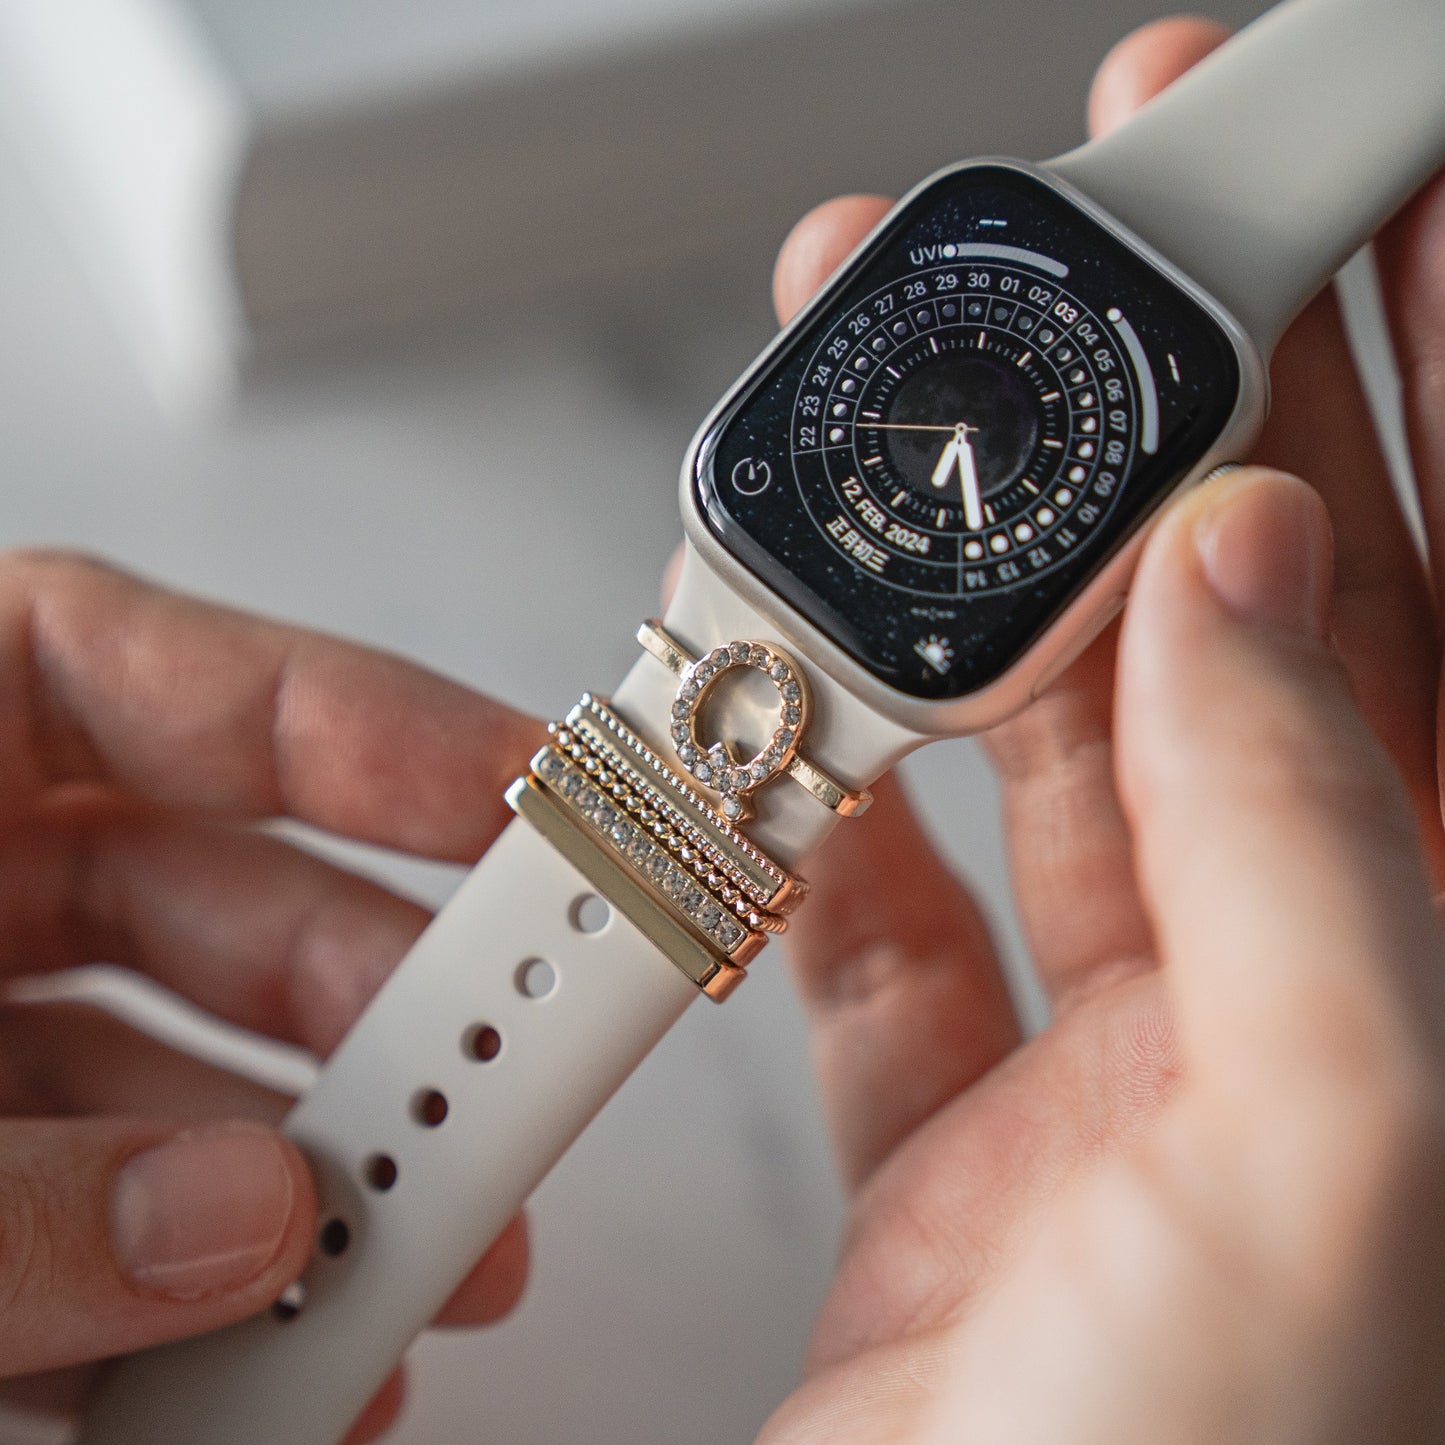 arktisband Apple Watch Charms "Q Style"